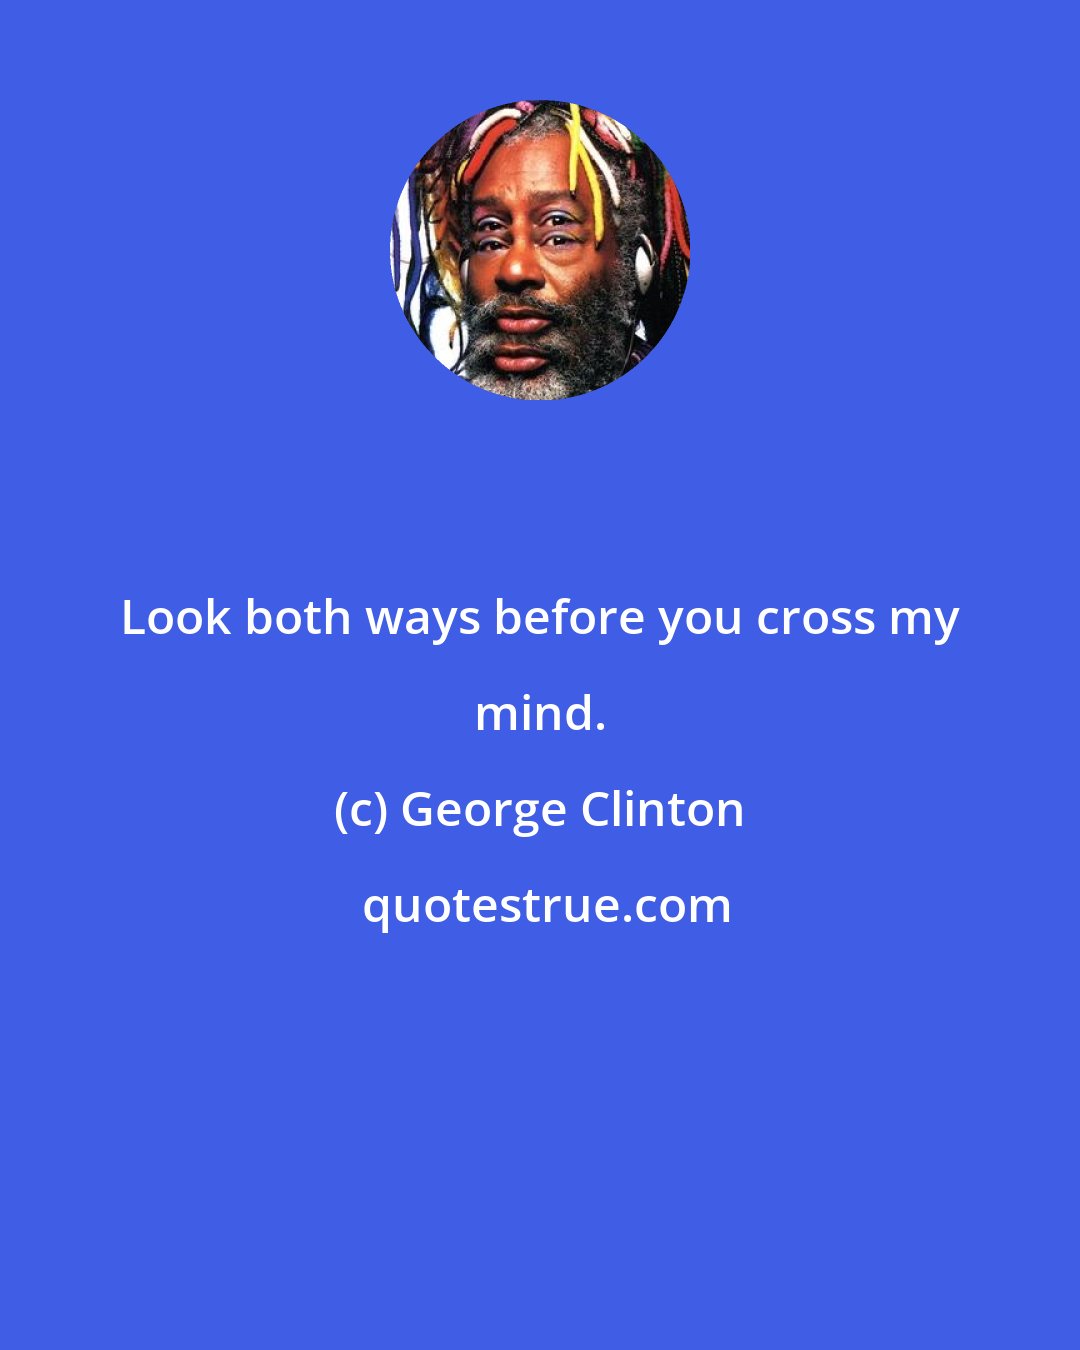 George Clinton: Look both ways before you cross my mind.